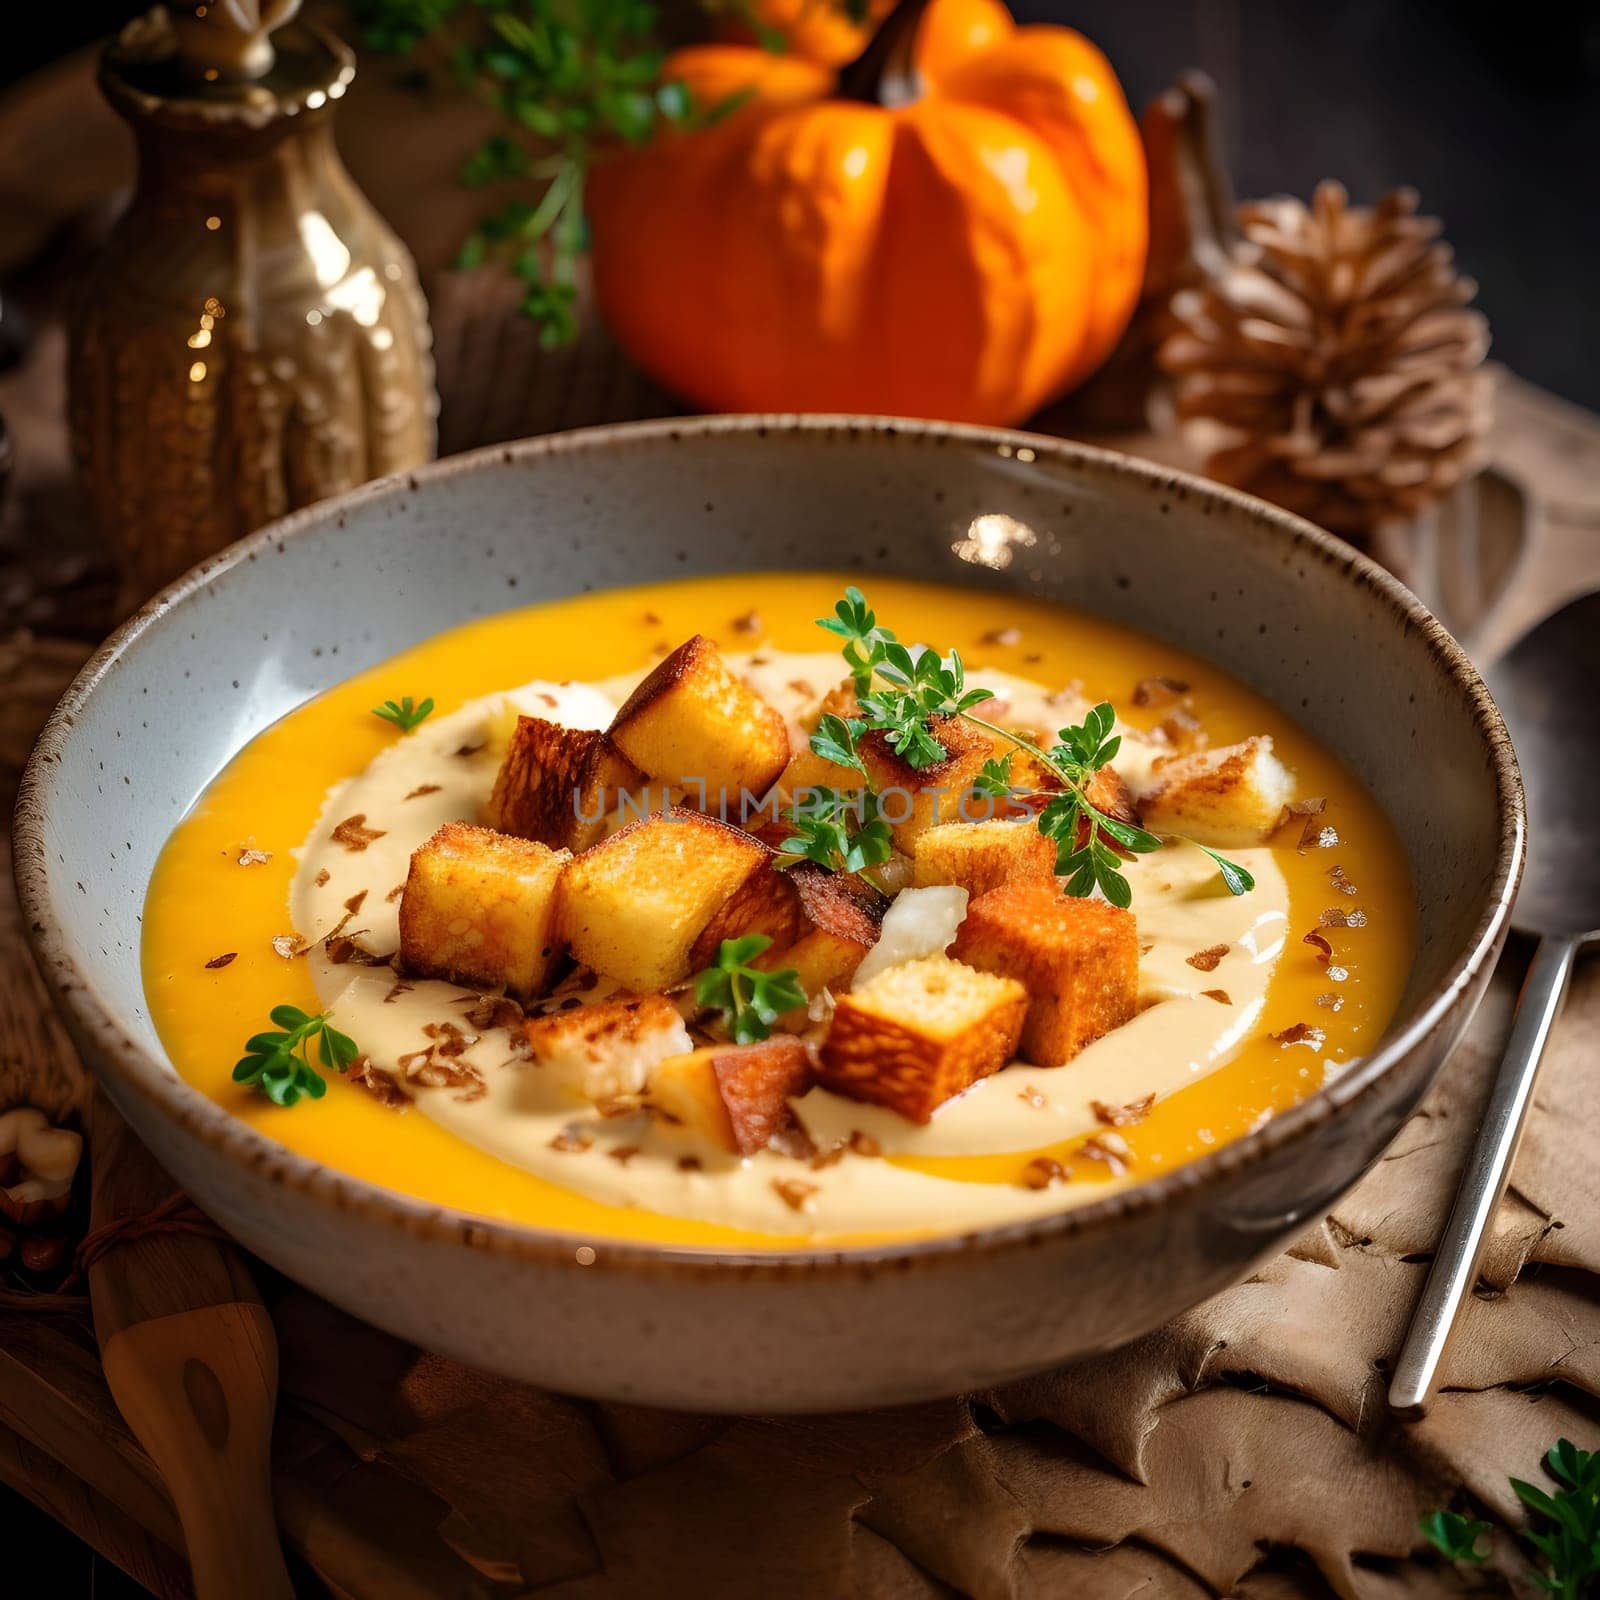 Pumpkin soup in a bowl with croutons and spiced leaves. Pumpkin as a dish of thanksgiving for the harvest. by ThemesS